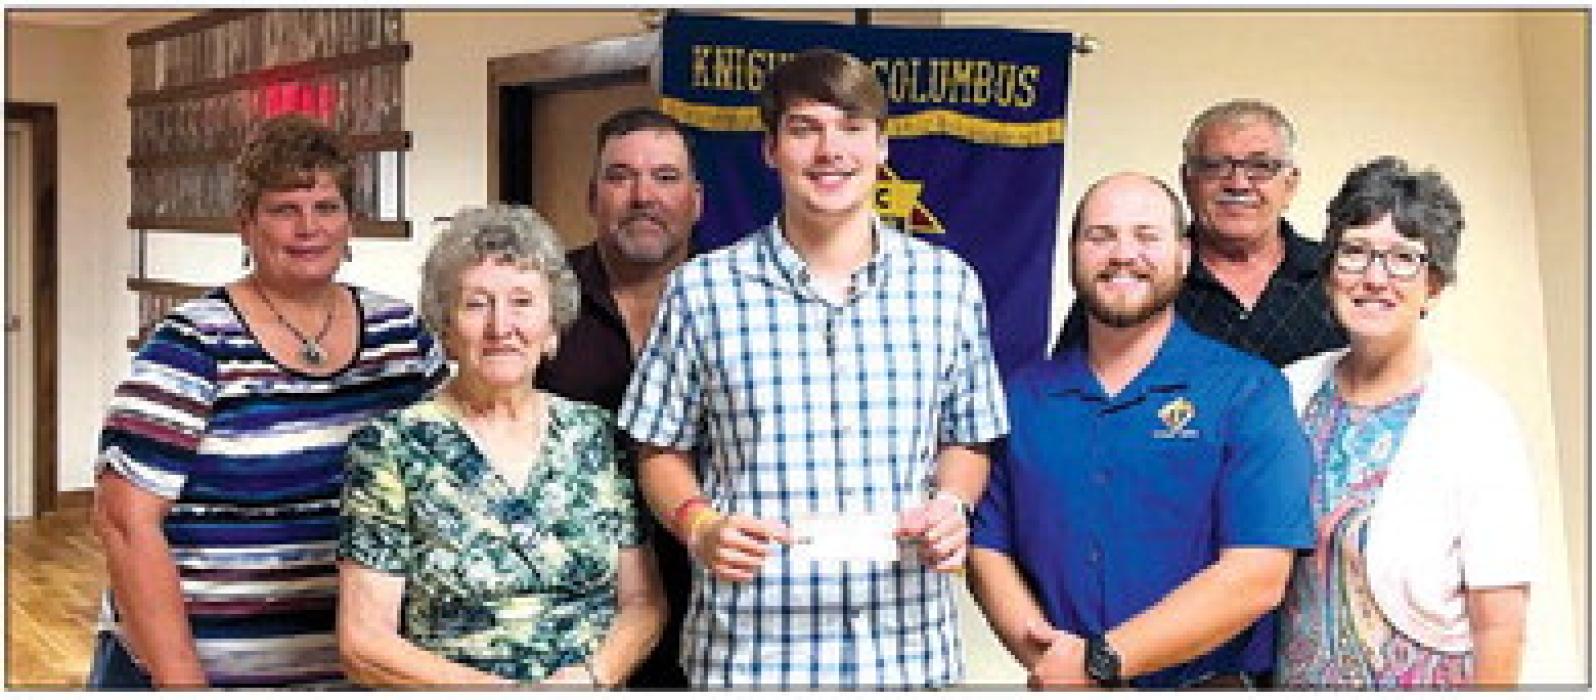 Receiving a Knights of Columbus Scholarship in honor of deceased member Arnold Janda is Zachary Janda.